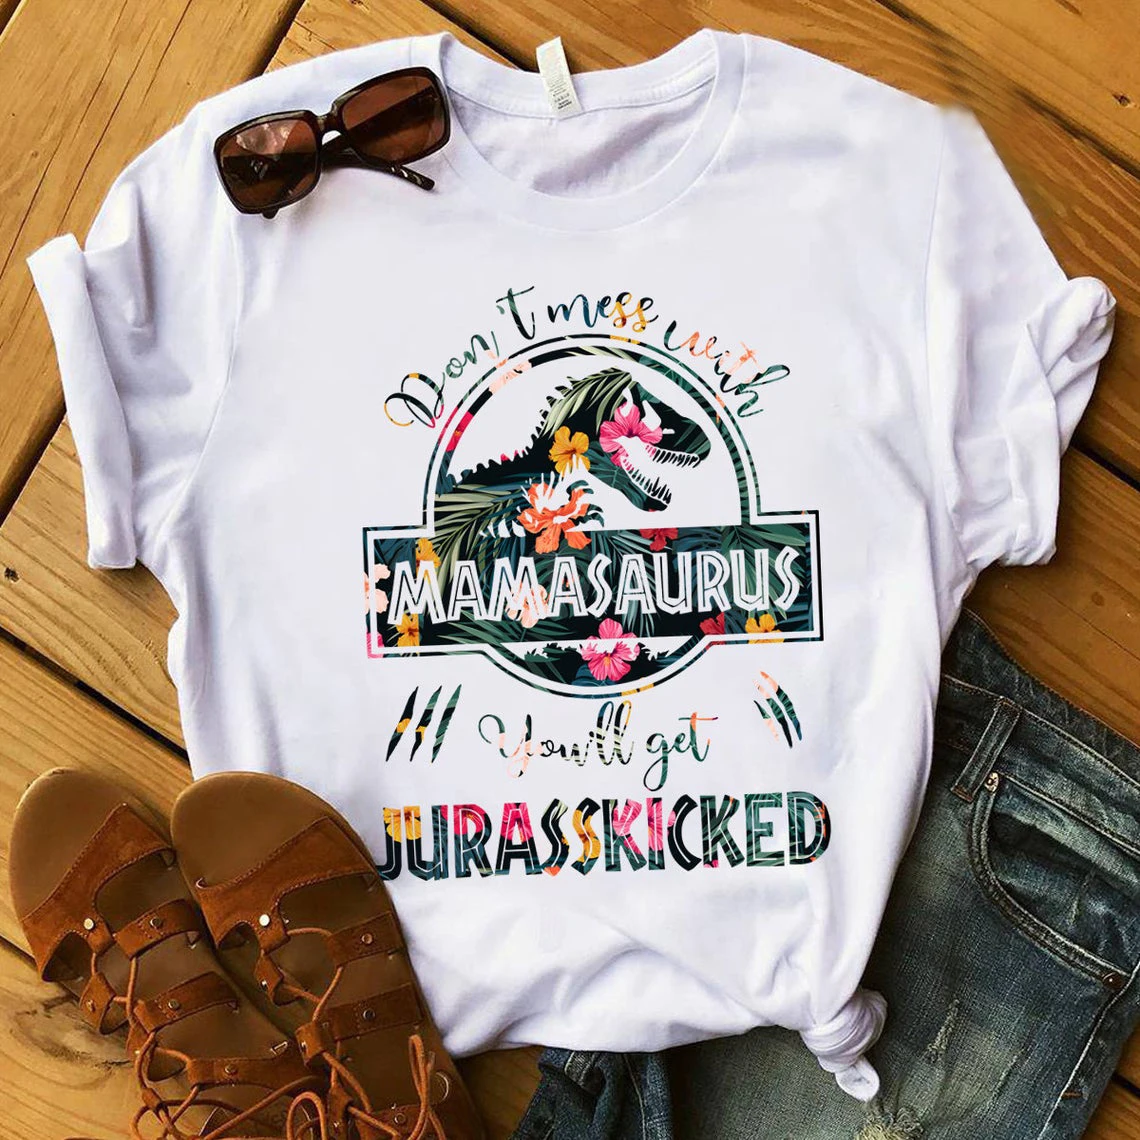 

2021 Hot Sale Mamasaurus Women Shirt Gift for Mom Female Don't Mess with Mamasaurus You'll Get Jurasskicked Tshirt Dinosaur Tops